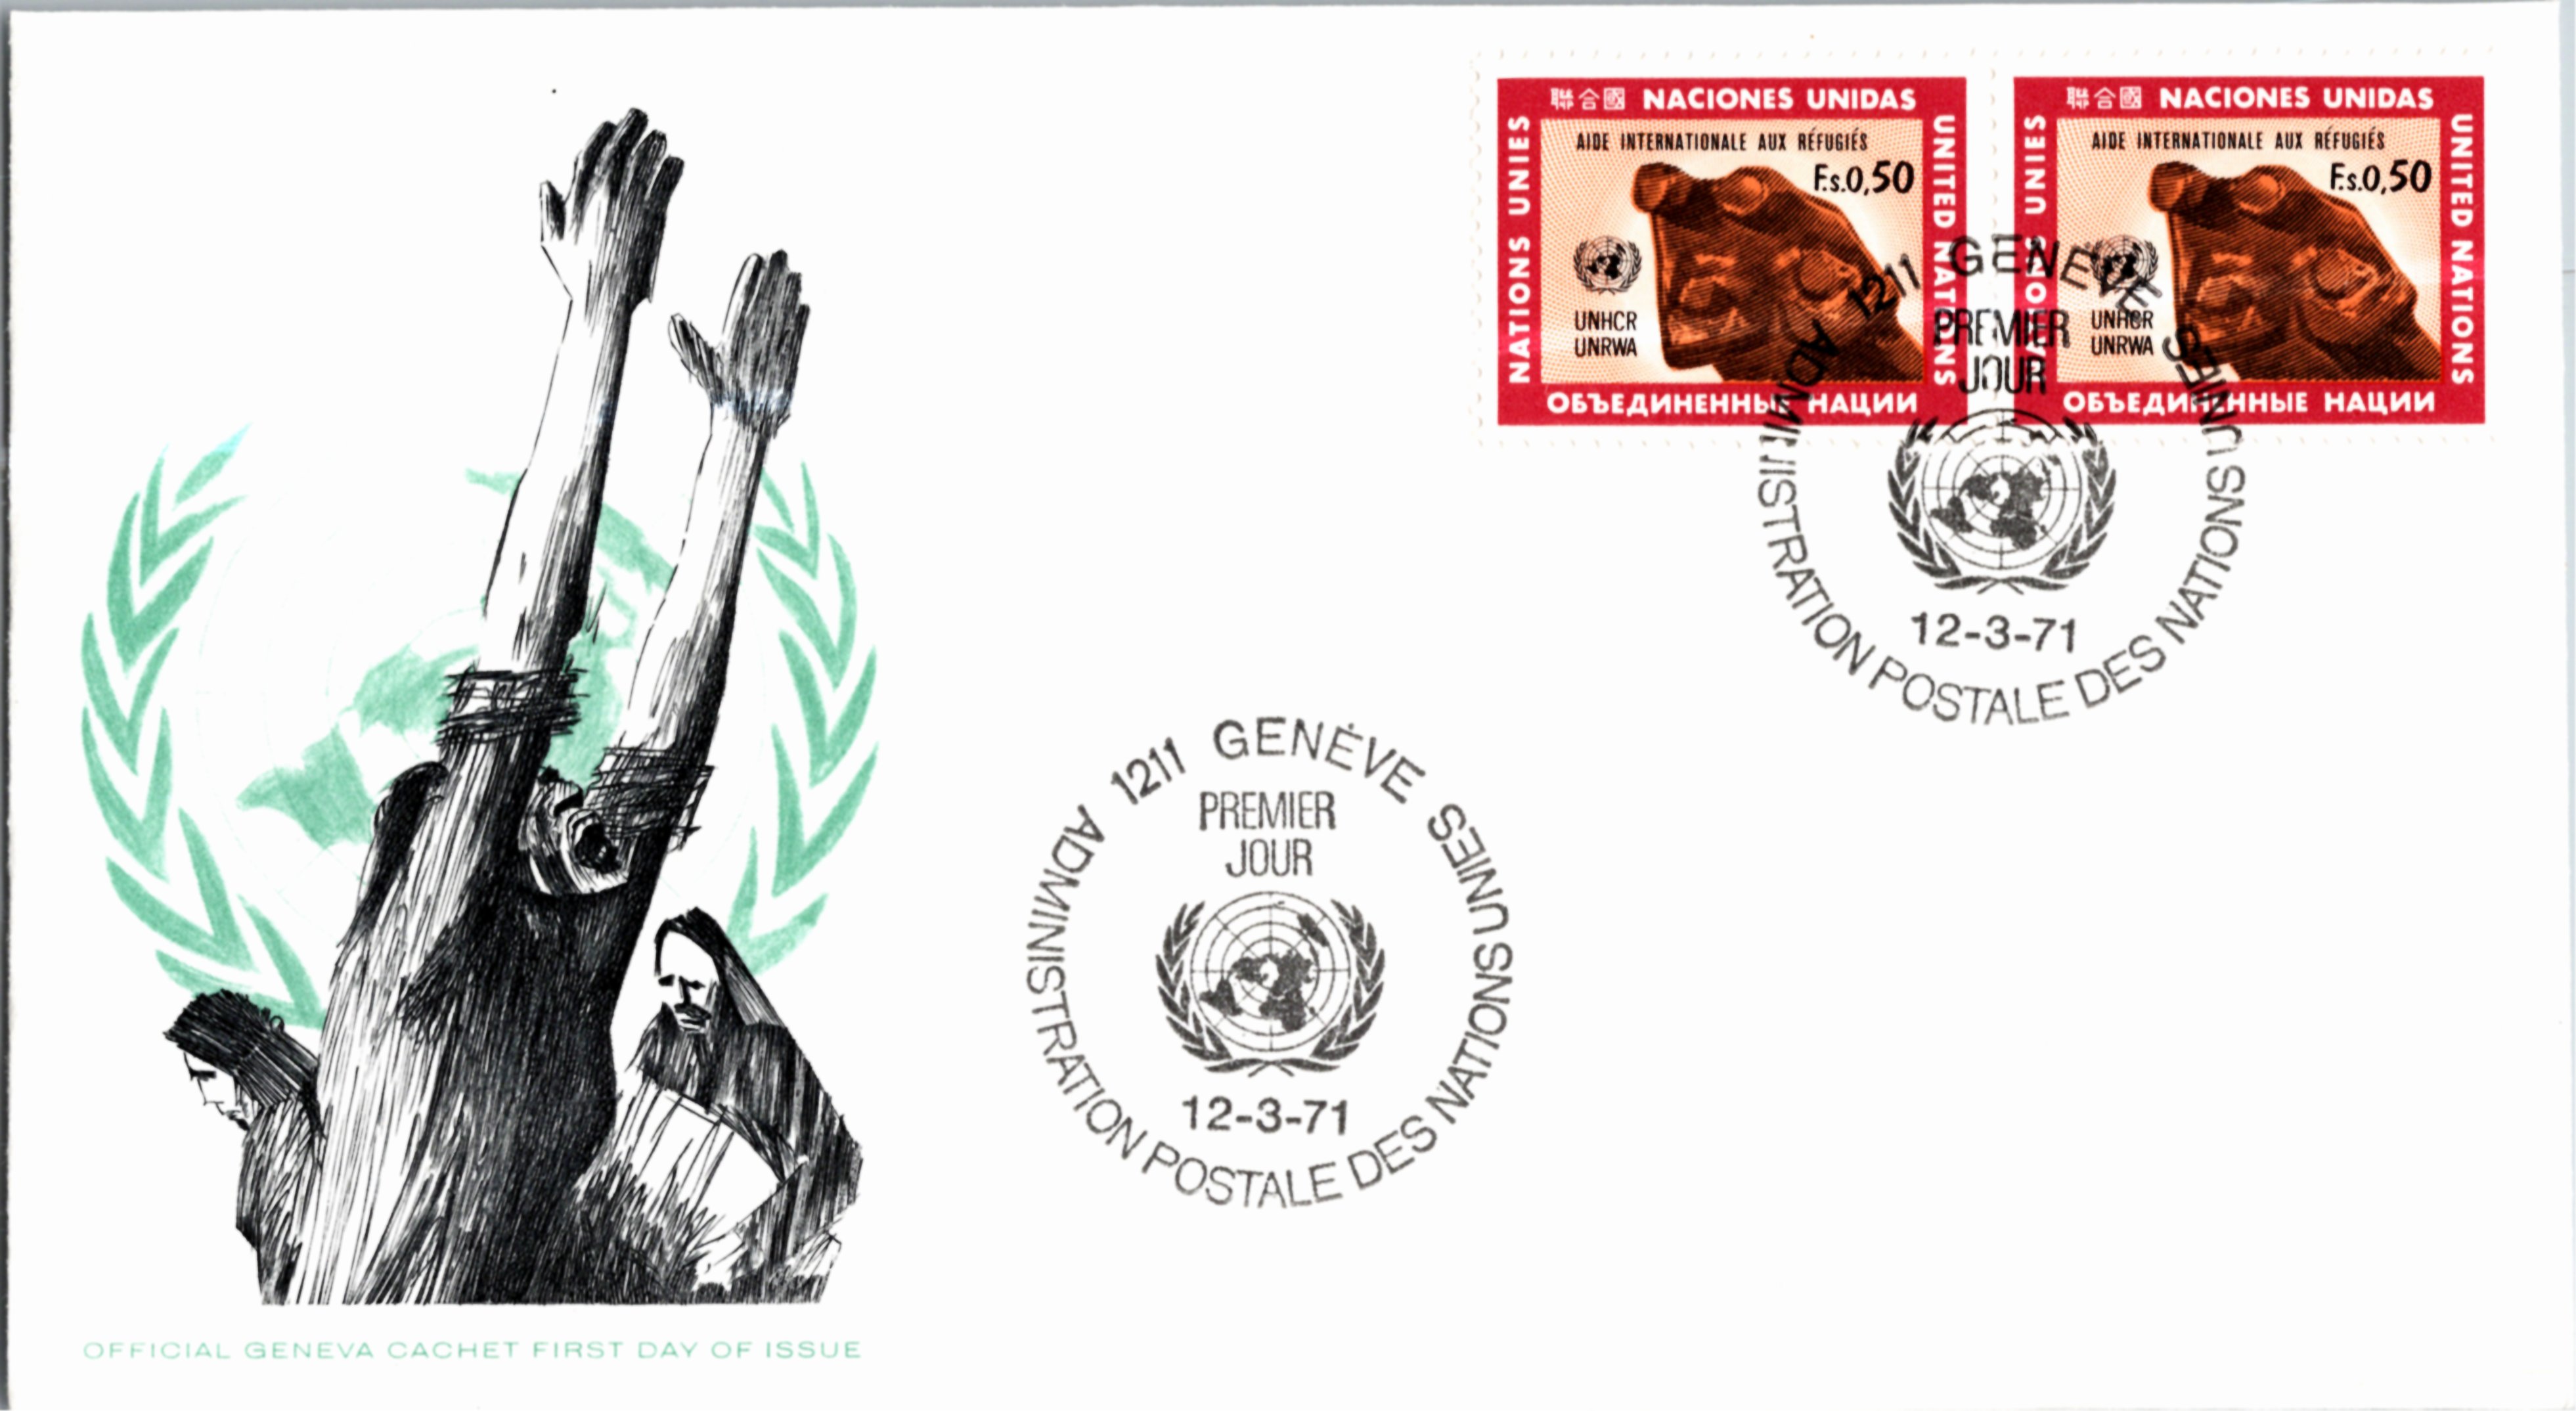 United Nations Vienna, Worldwide First Day Cover